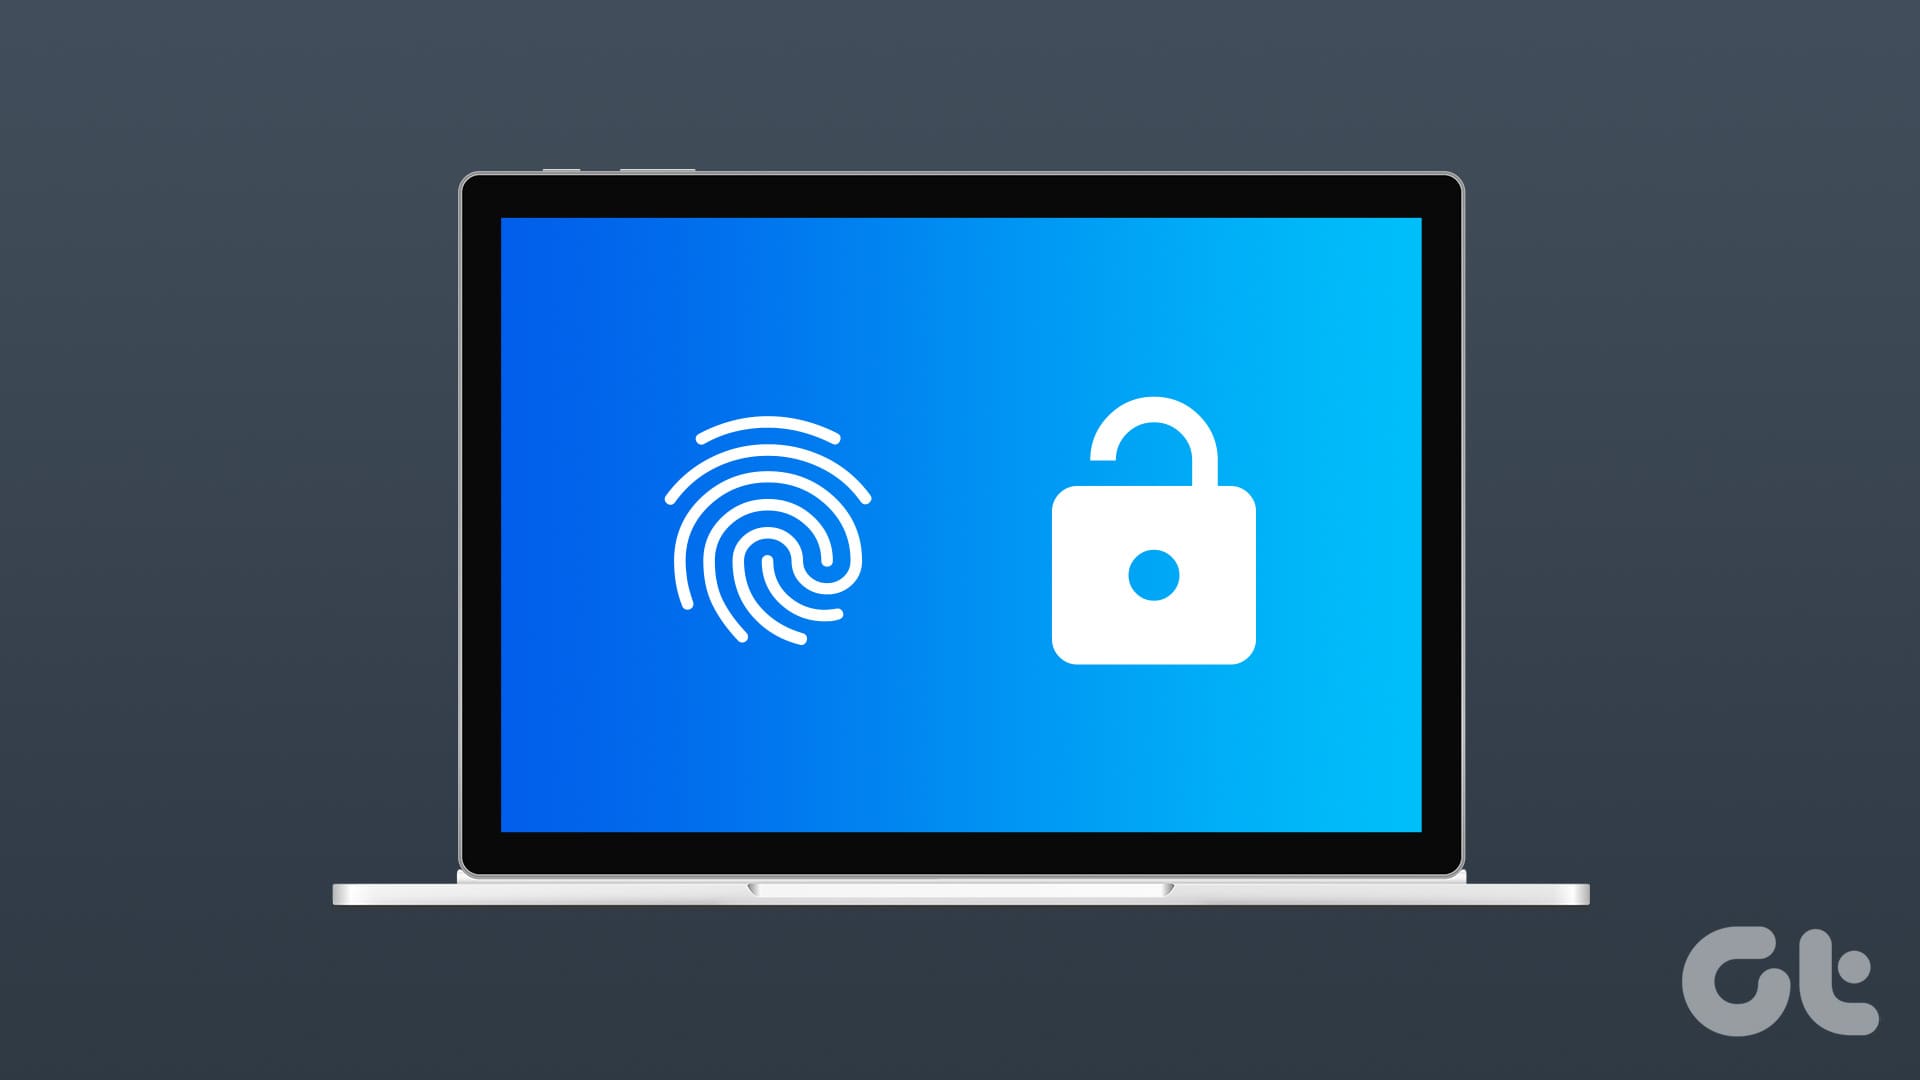 Unlock Your Windows PC Remotely with Fingerprint Scanner on Android